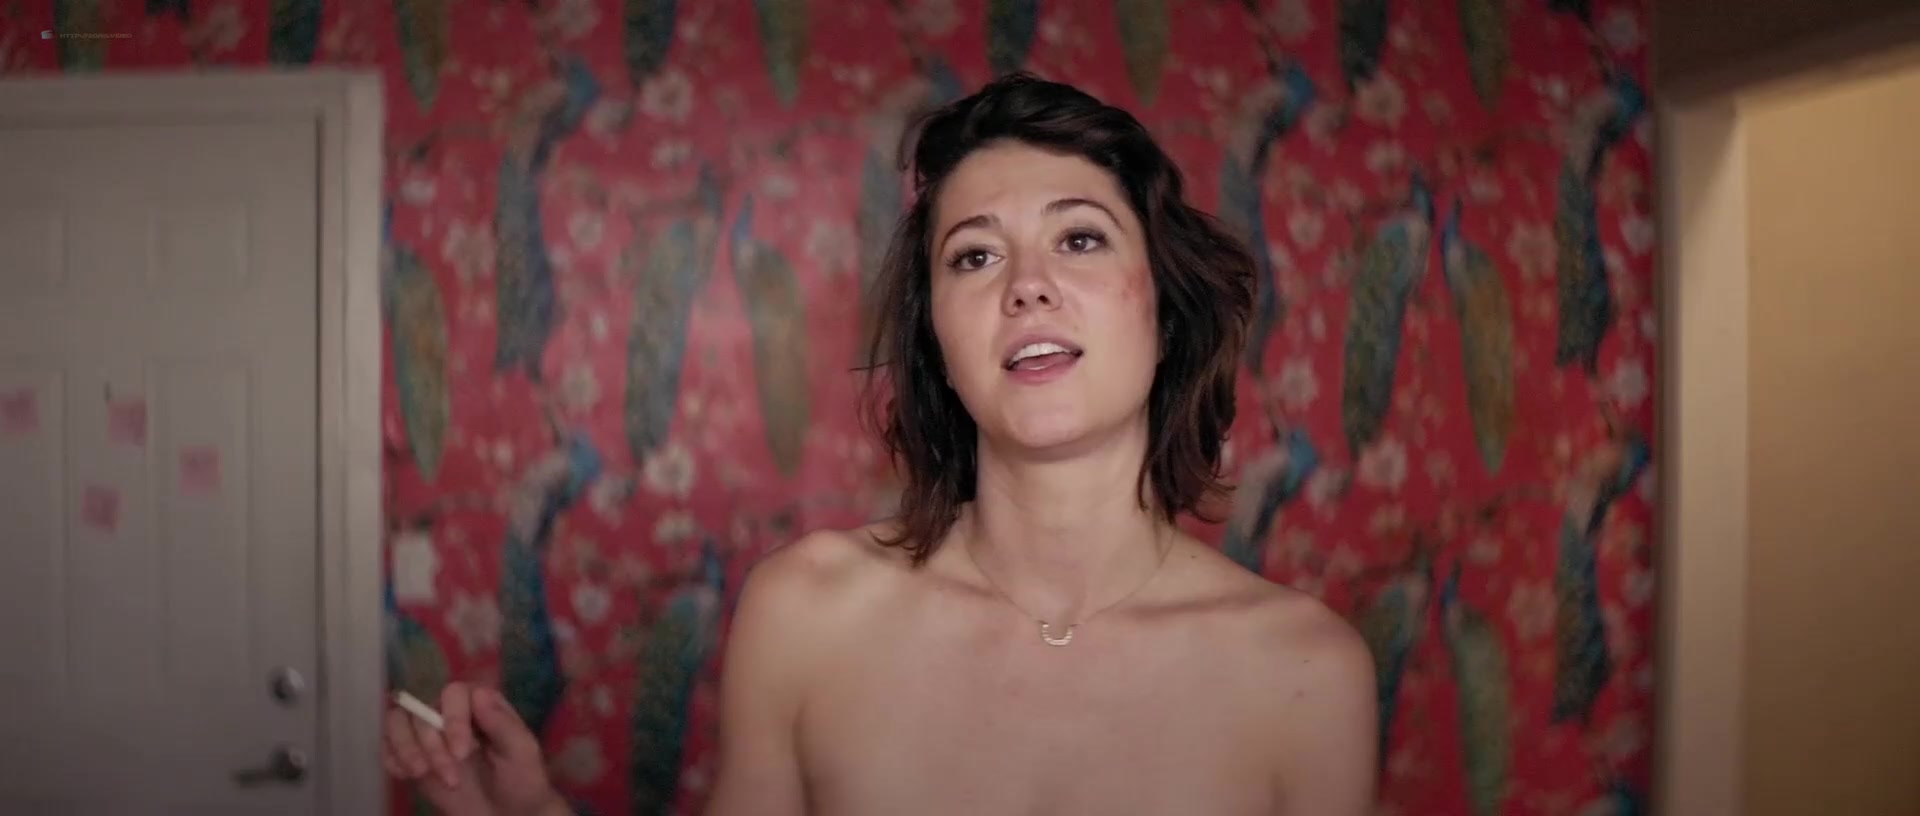 Mary elizabeth winstead nude pictures